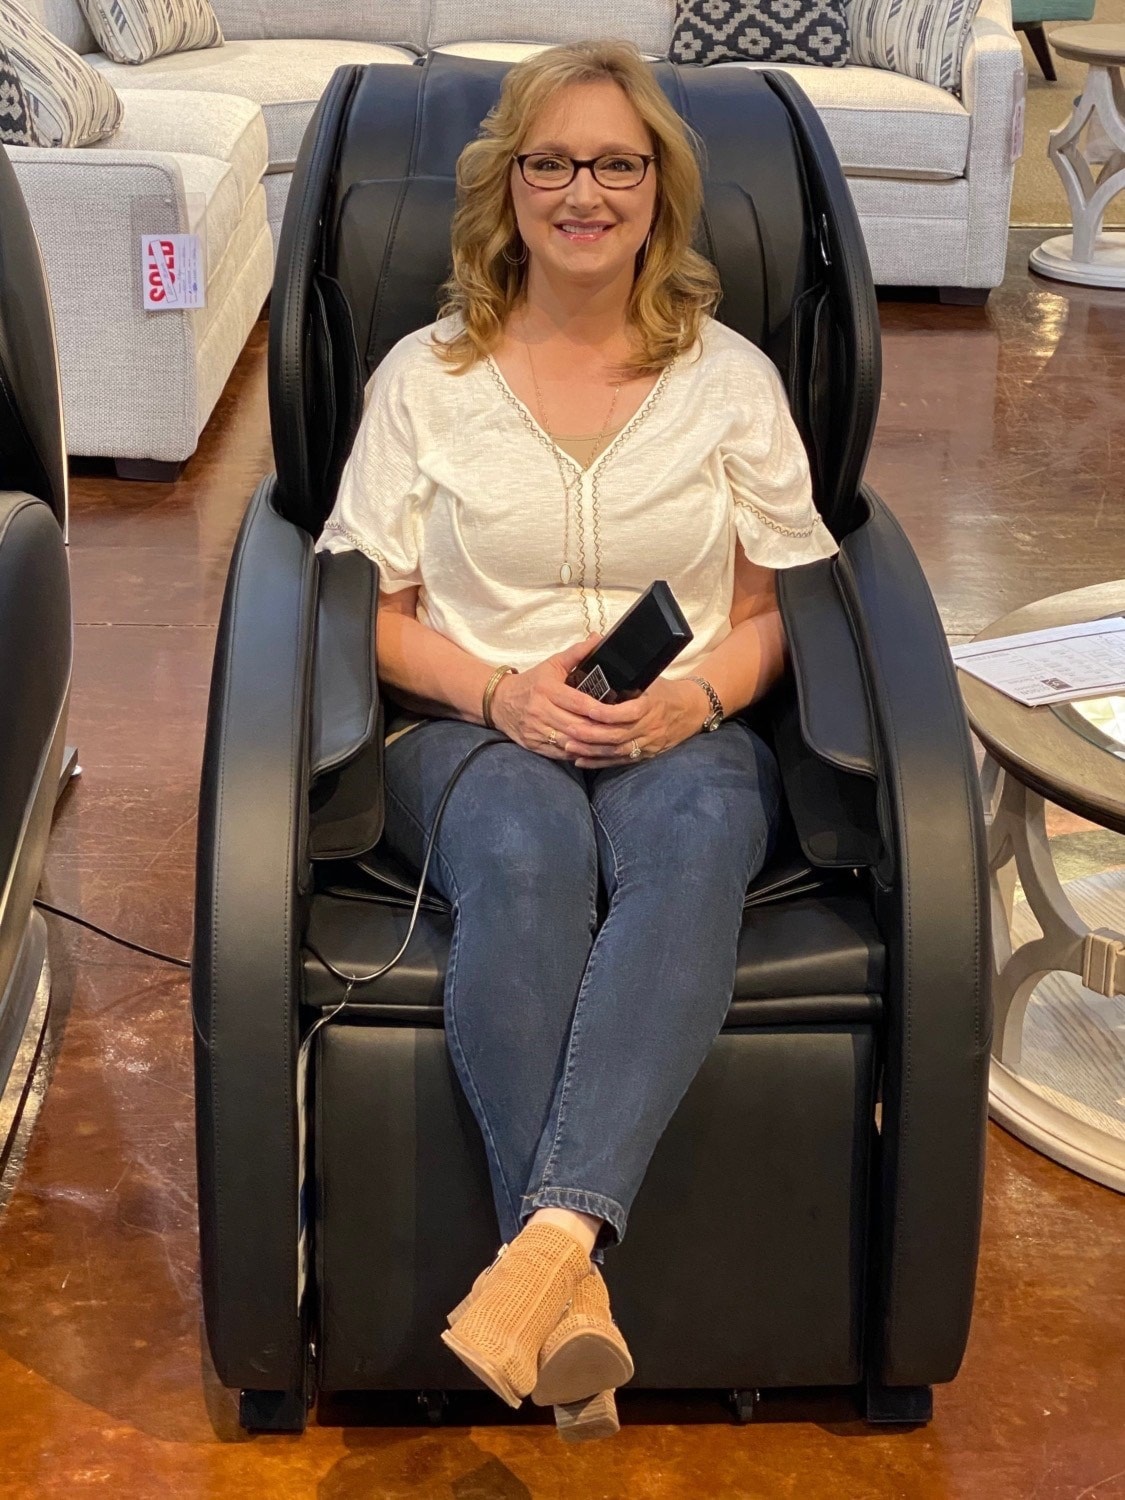 Leslie Little-Riggs on being the winner of the $4,000* Core Nine massage chair!